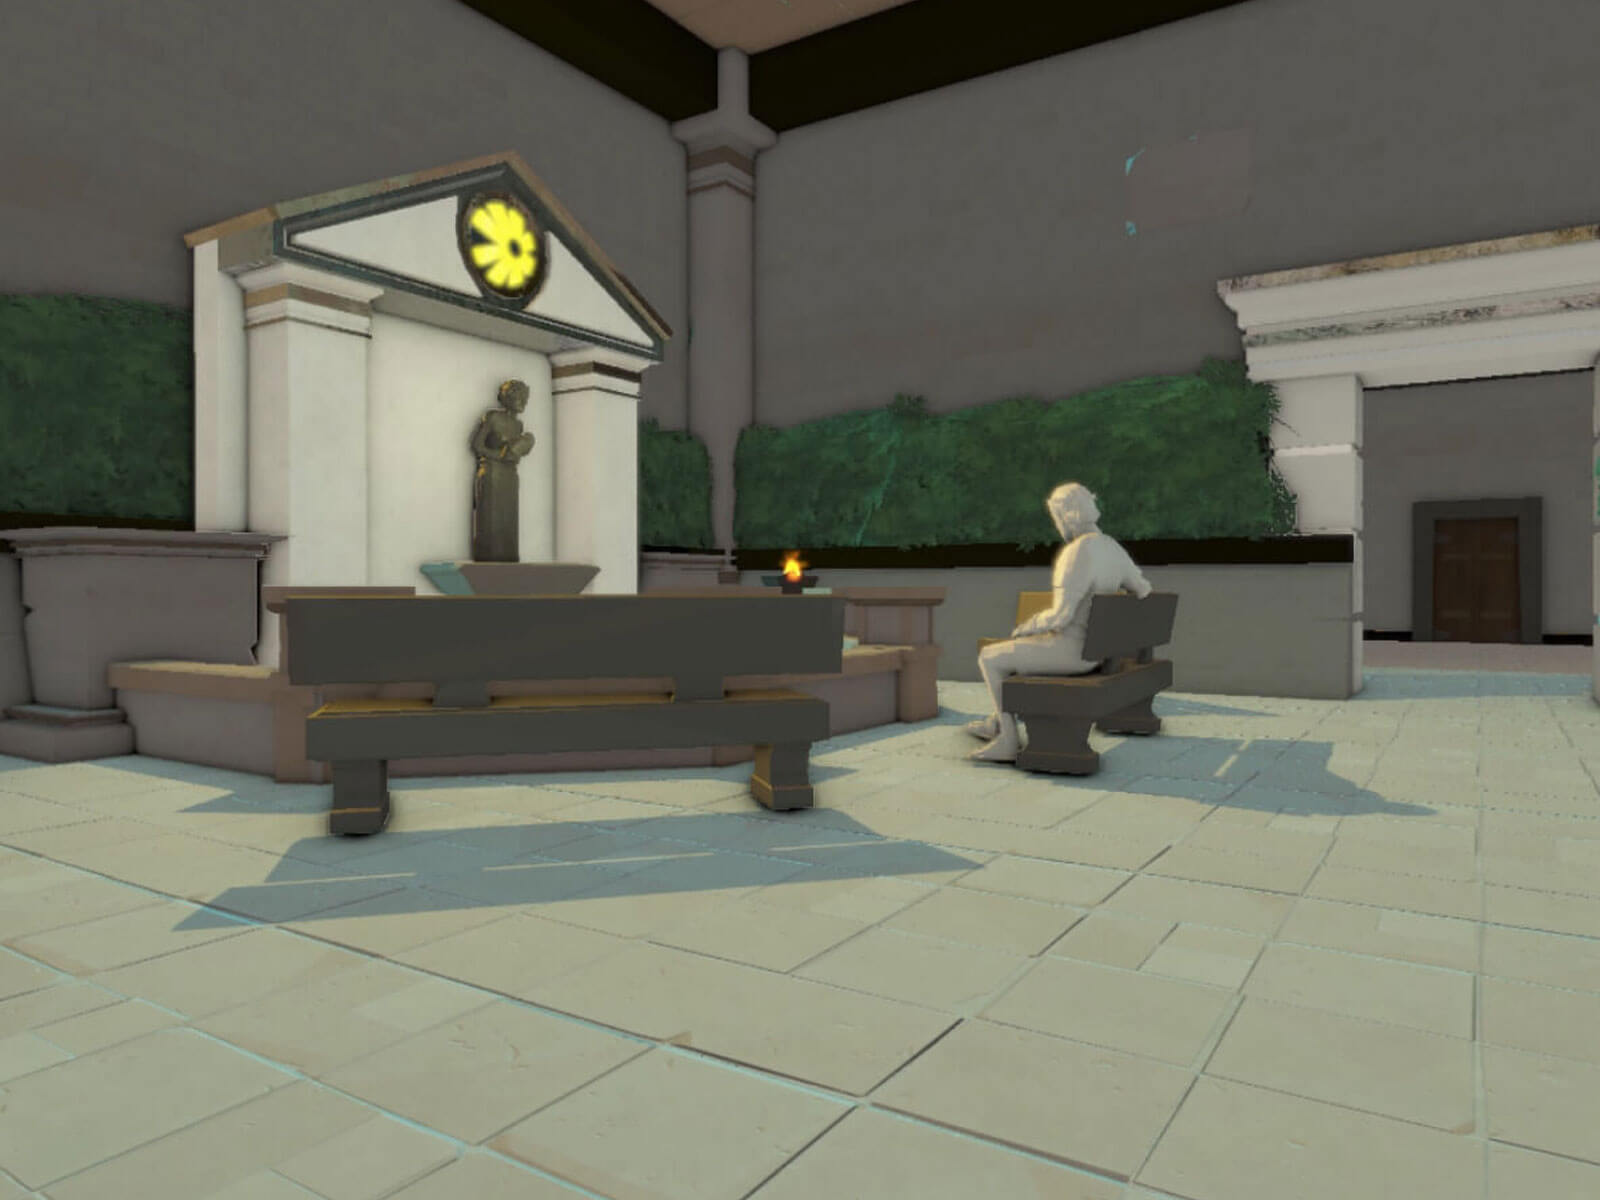 A stone character sits on a bench before an altar.